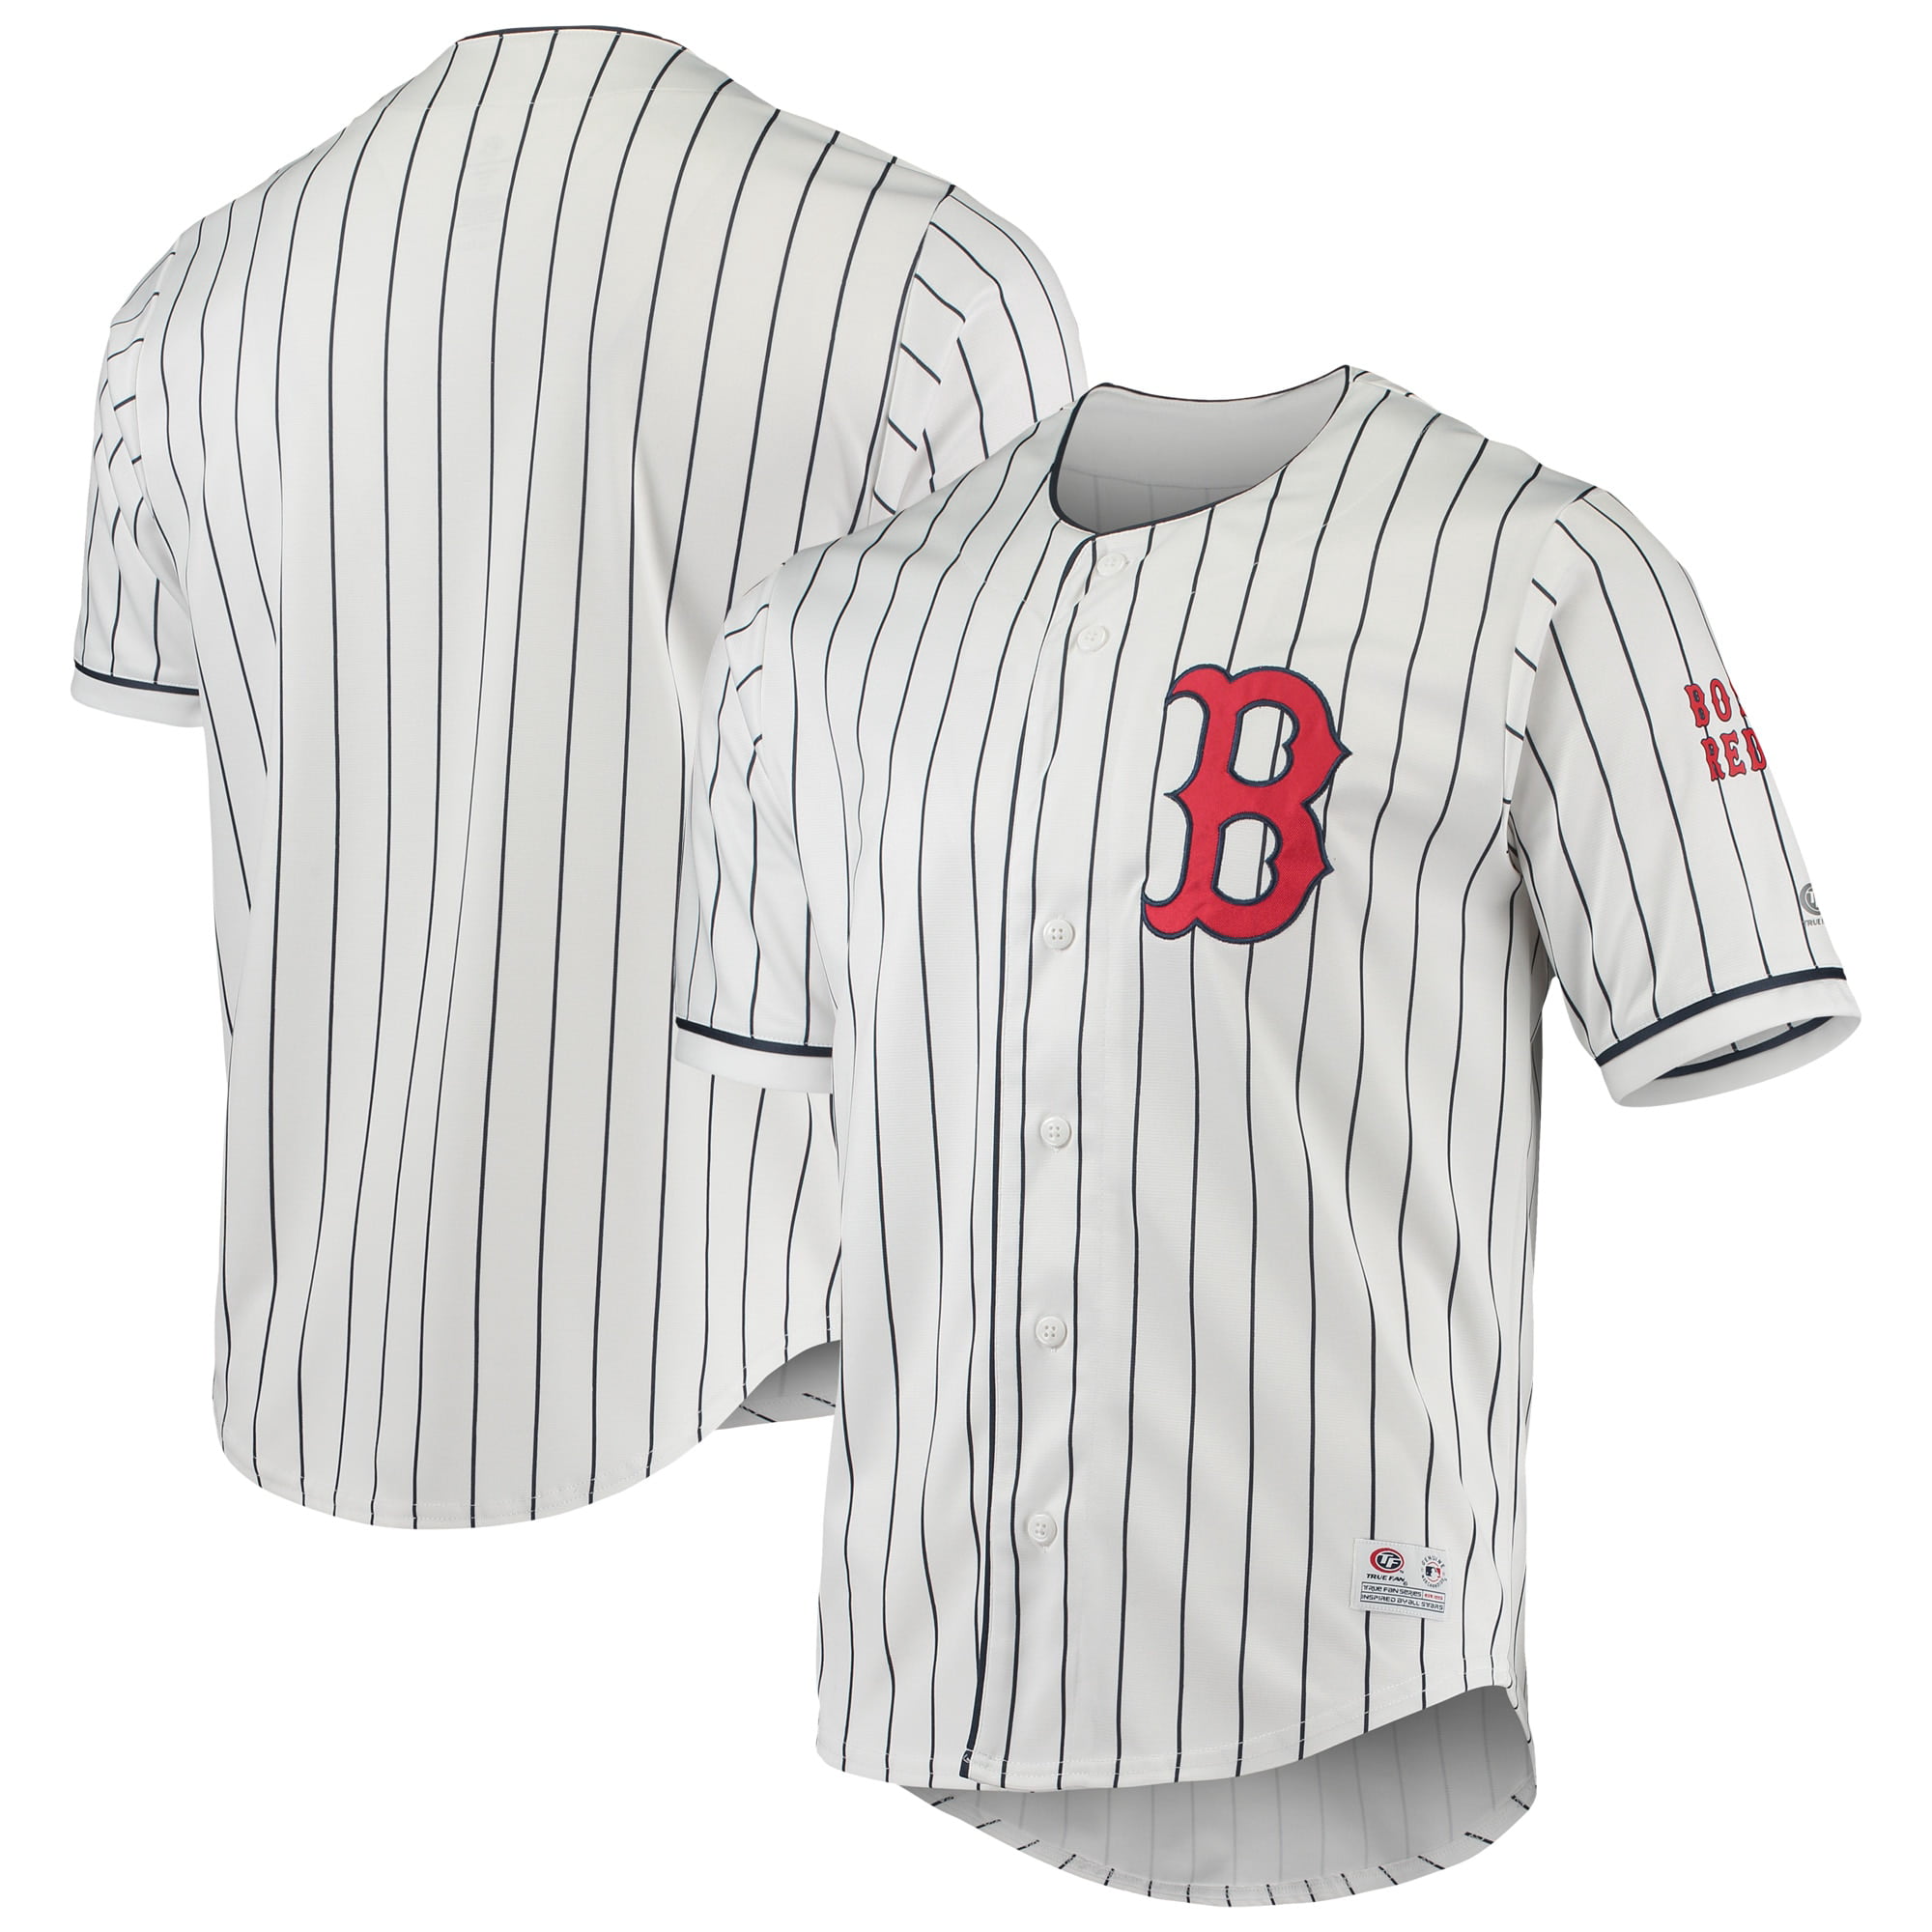 red sox white jersey